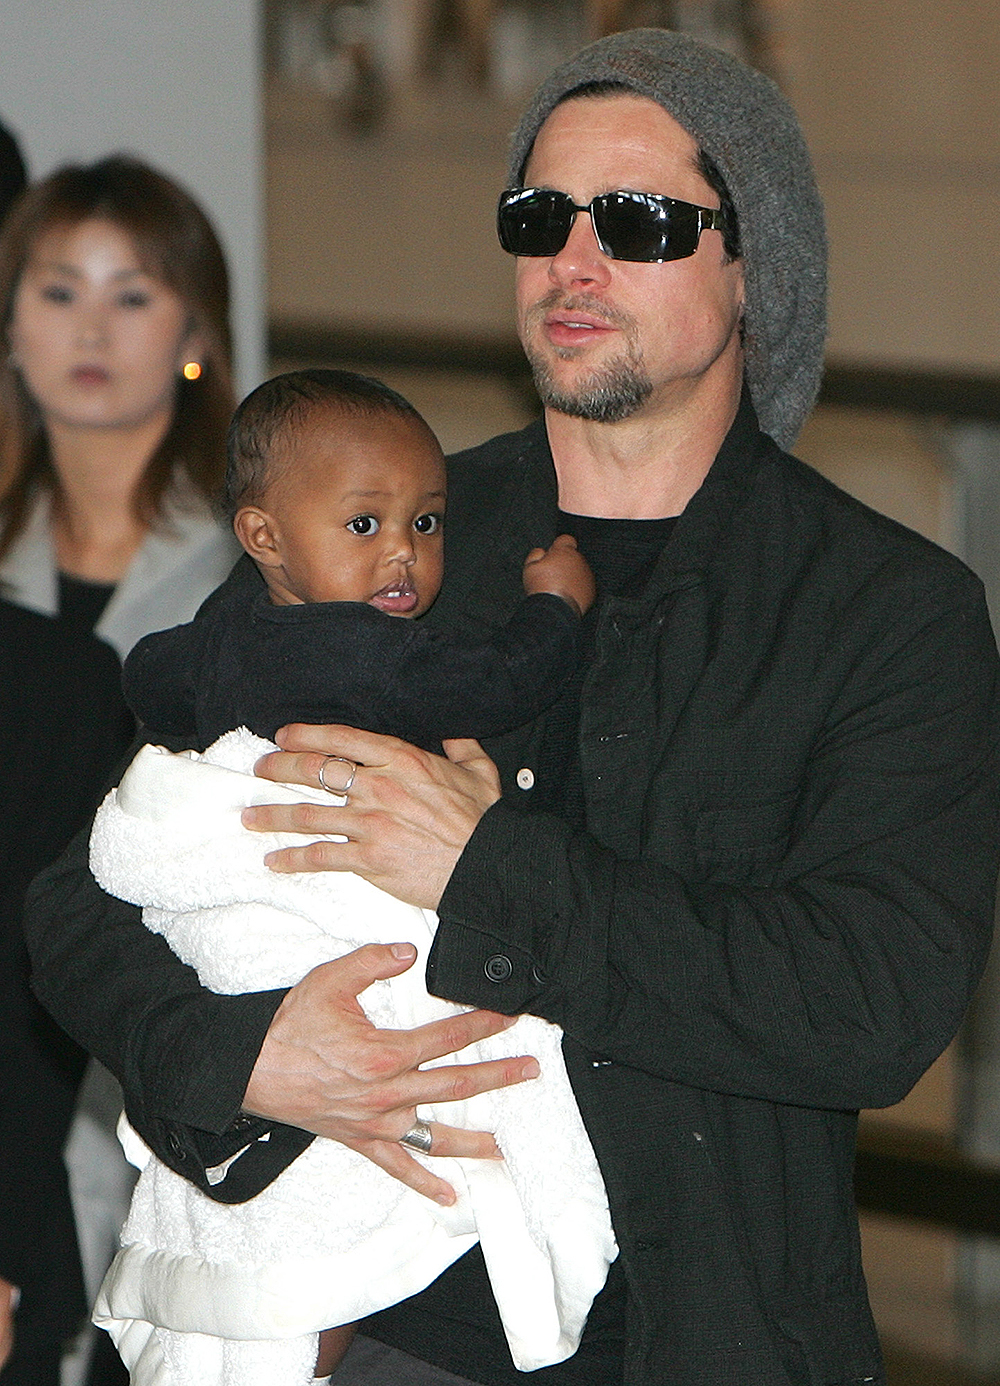 Hollywood actor Brad Pitt holds Zahara, daughter of Angelina Jolie, upon arrival at Tokyo International Airport in Narita on Sunday November 27, 2005. The actor, along with actress and UNHCR Goodwill Ambassador Angelina Jolie, arrived in Japan for the screening of their new film, Mr. and Mrs. Smith, scheduled for December 3. Before flying out for Japan, Brad Pitt, visiting Pakistan with Angelina Jolie, donated 40 orthopedic beds to a hospital in Islamabad who are struggling to cope with thousands of serious medical cases since the devastating earthquake of 8 October in northern Pakistan, according to the UN agency. (AP Photo/Shizuo Kambayashi)